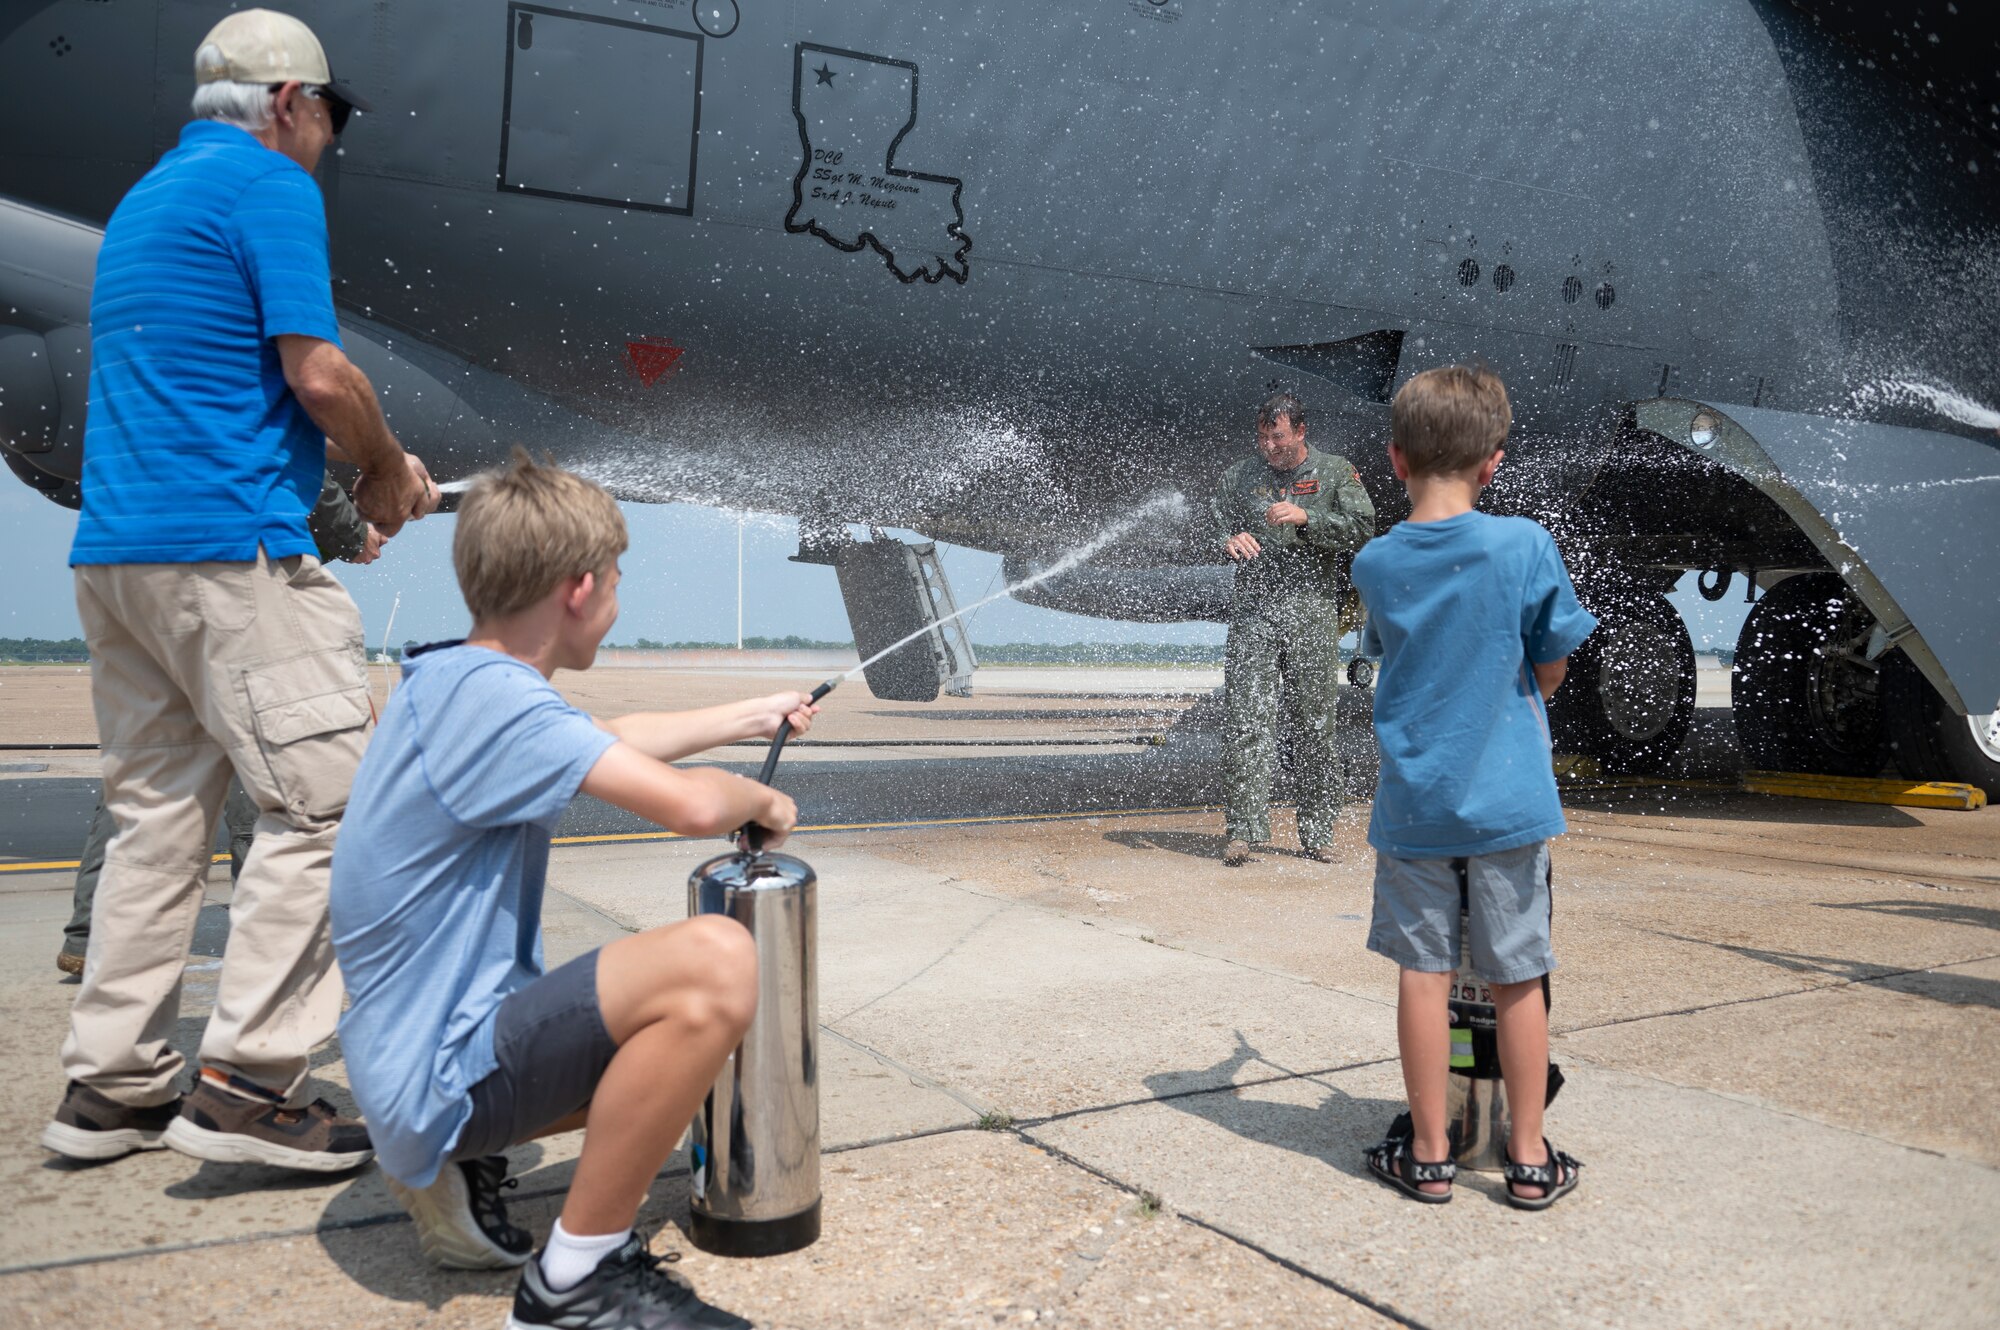 Photo of Airman being sprayed with water.